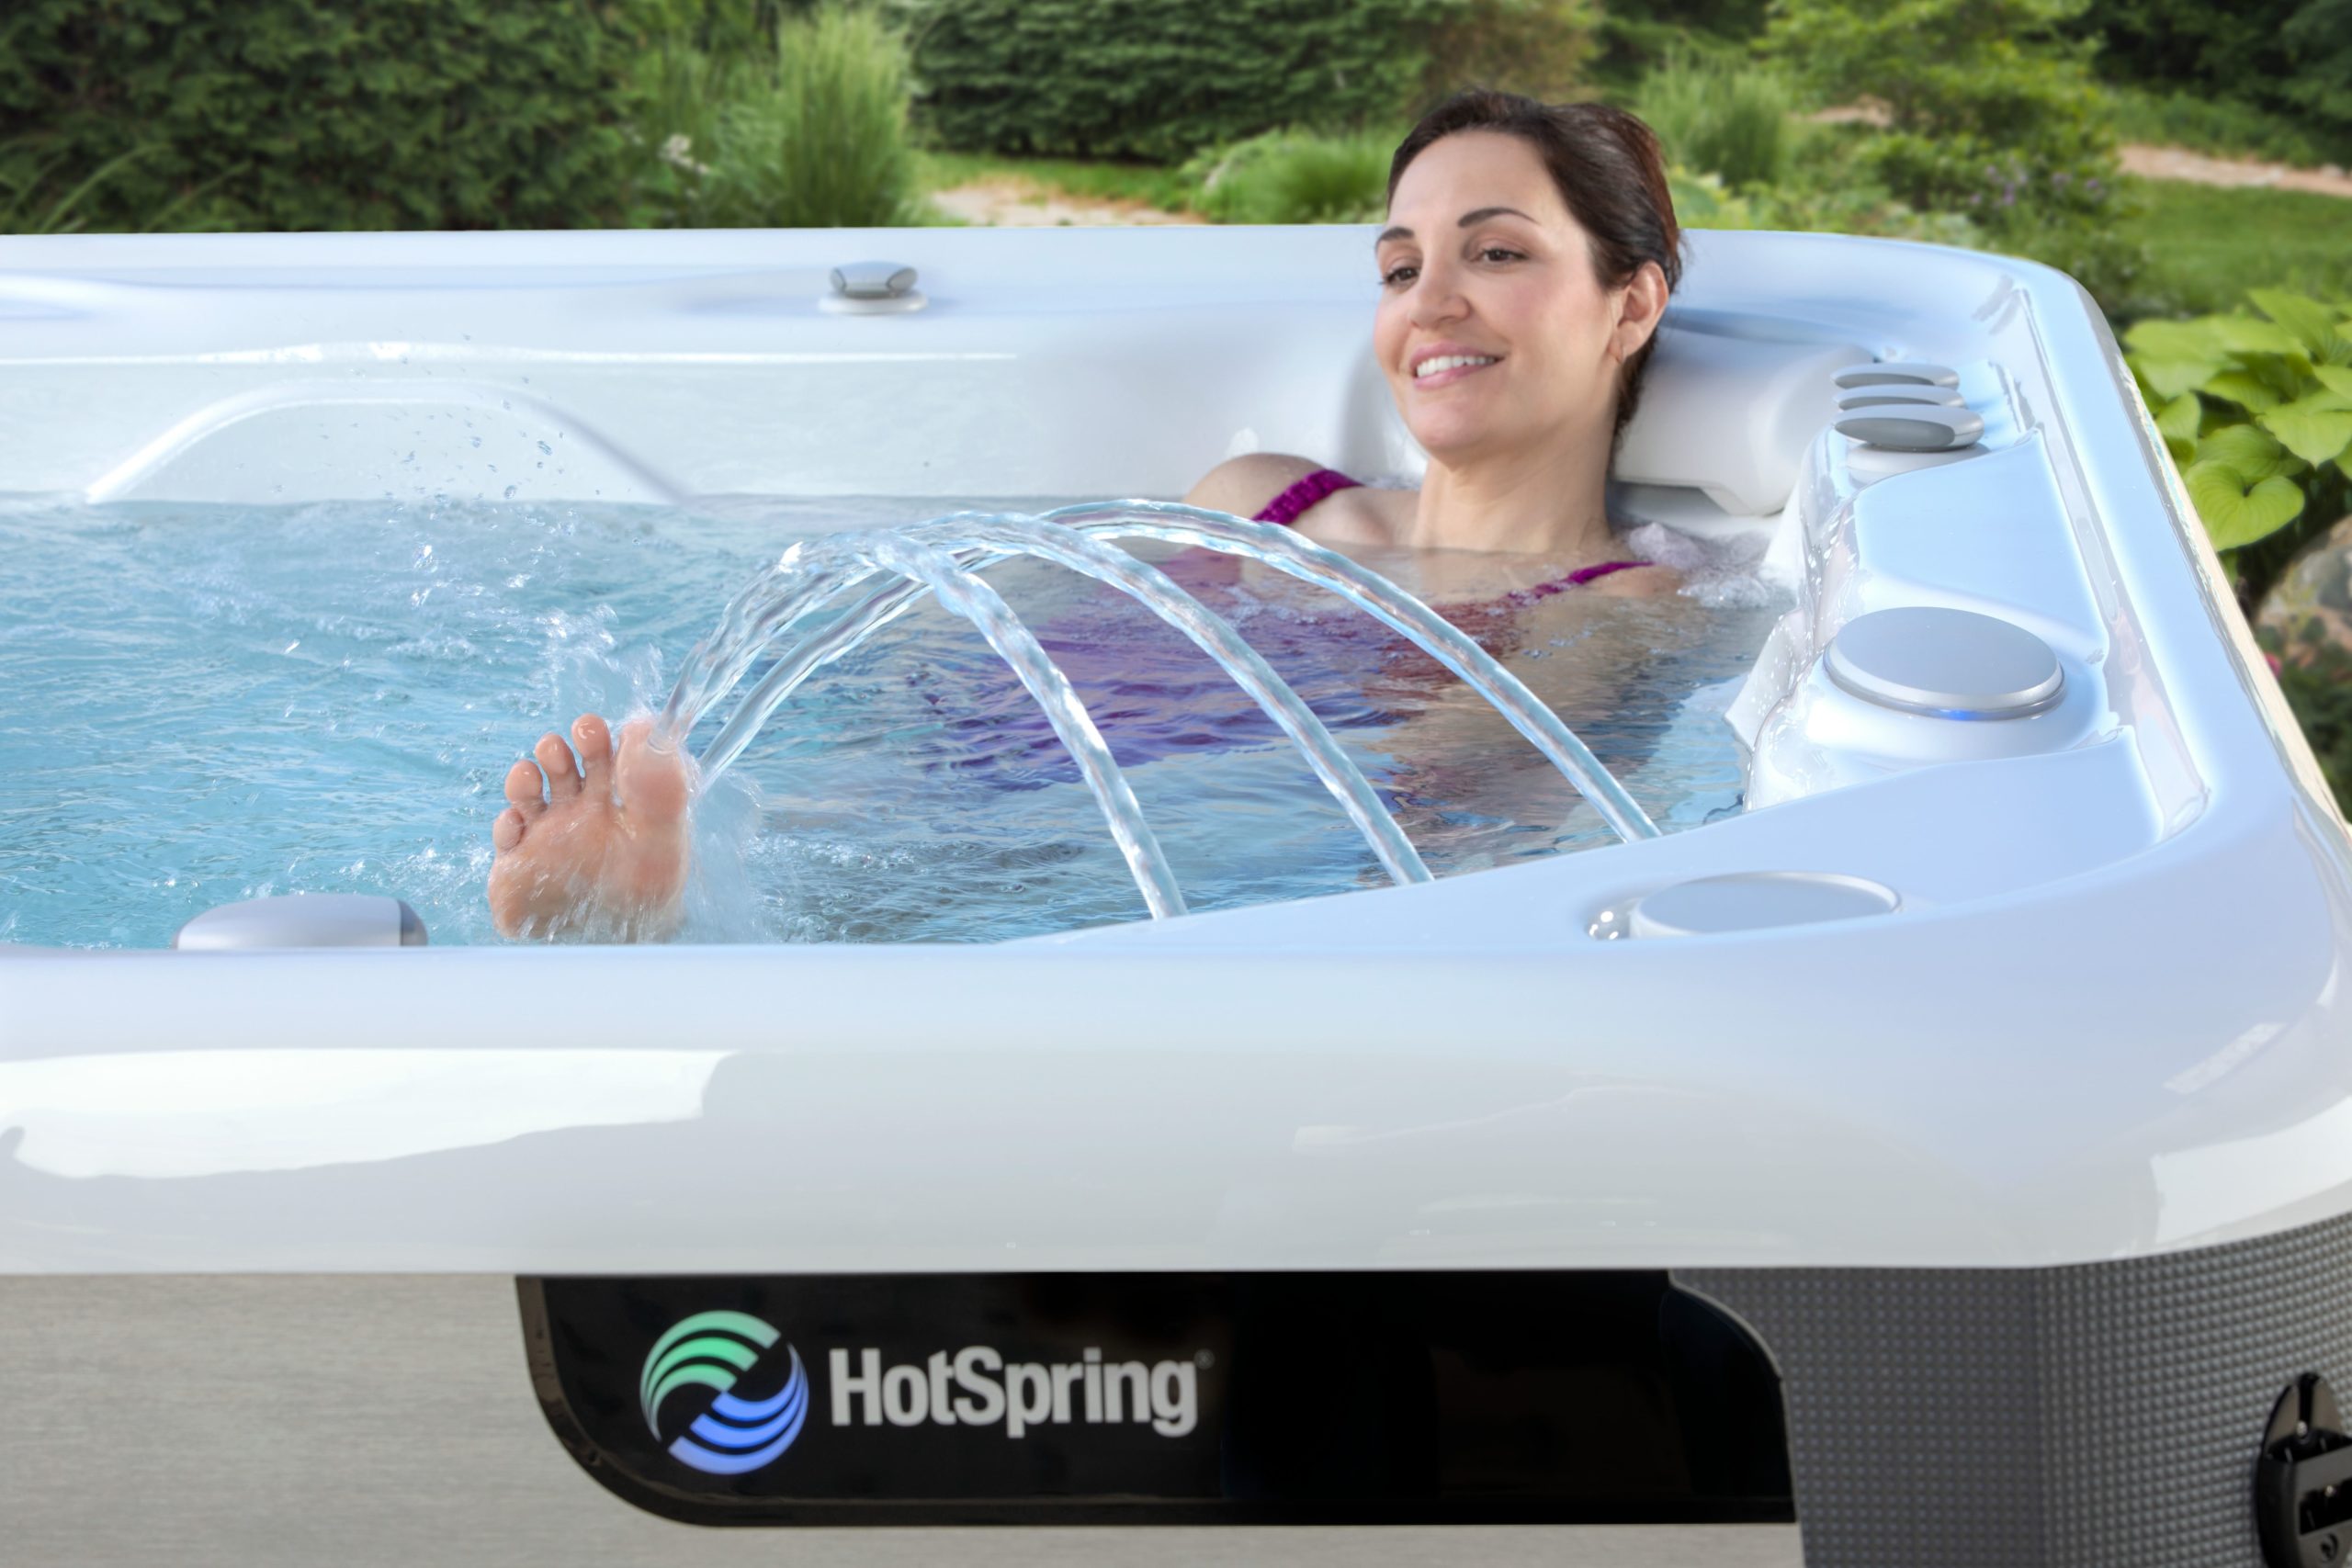 The best hot tub massage requires powerful jets from a reliable spa model.